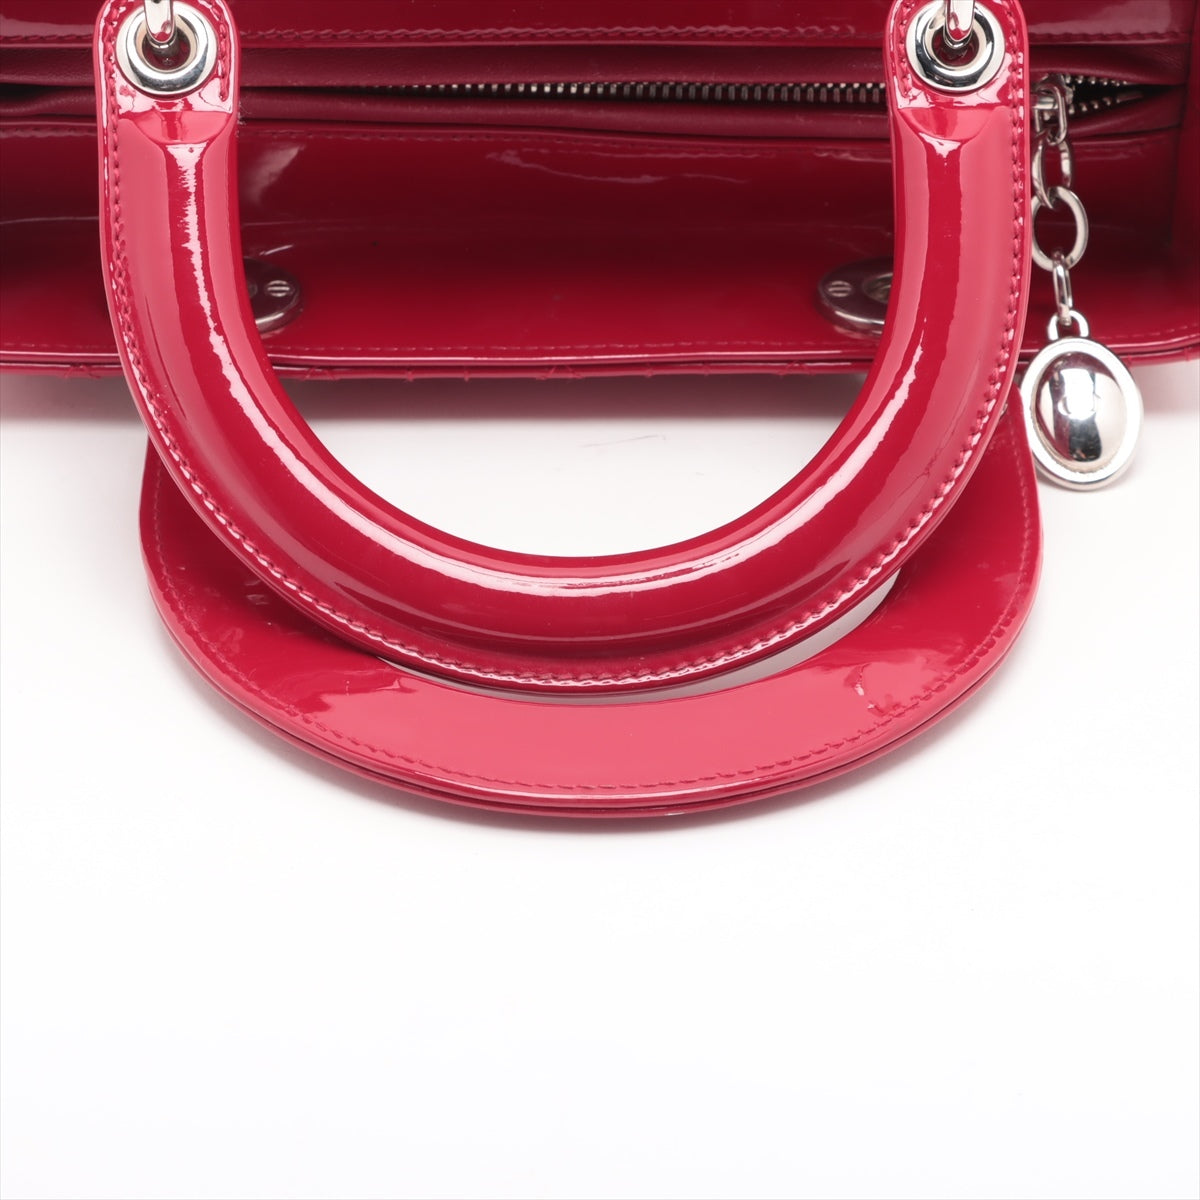 Christian Dior Lady Dior Cannage Patent Leather 2 Way Handbag Red